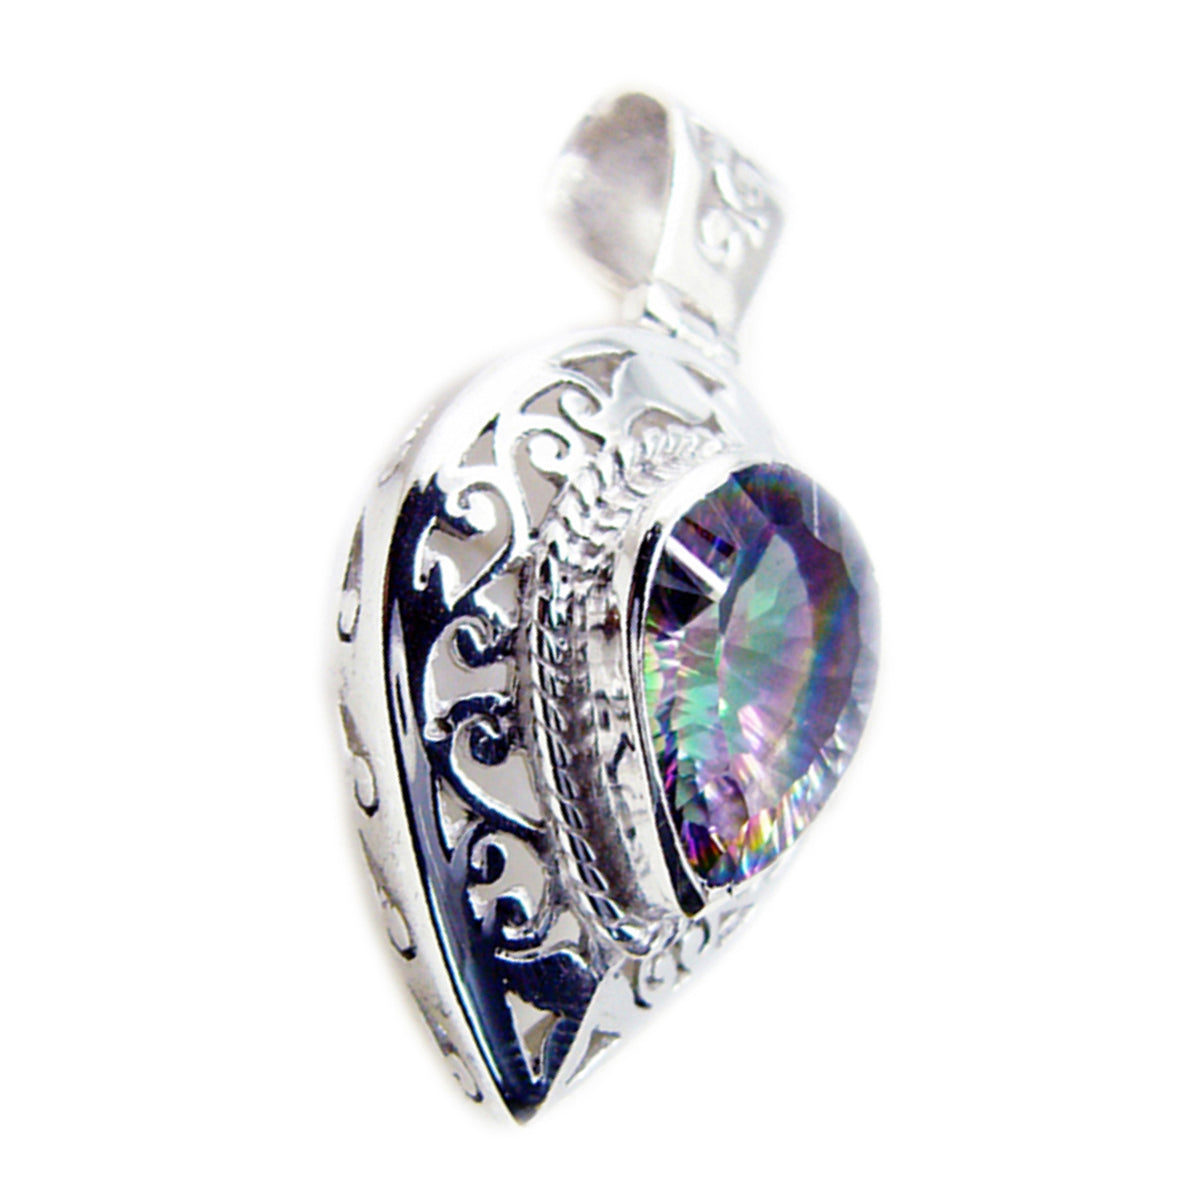 Riyo Irresistible Gems Pear Faceted Multi Color Mystic Quartz Solid Silver Pendant Gift For Anniversary